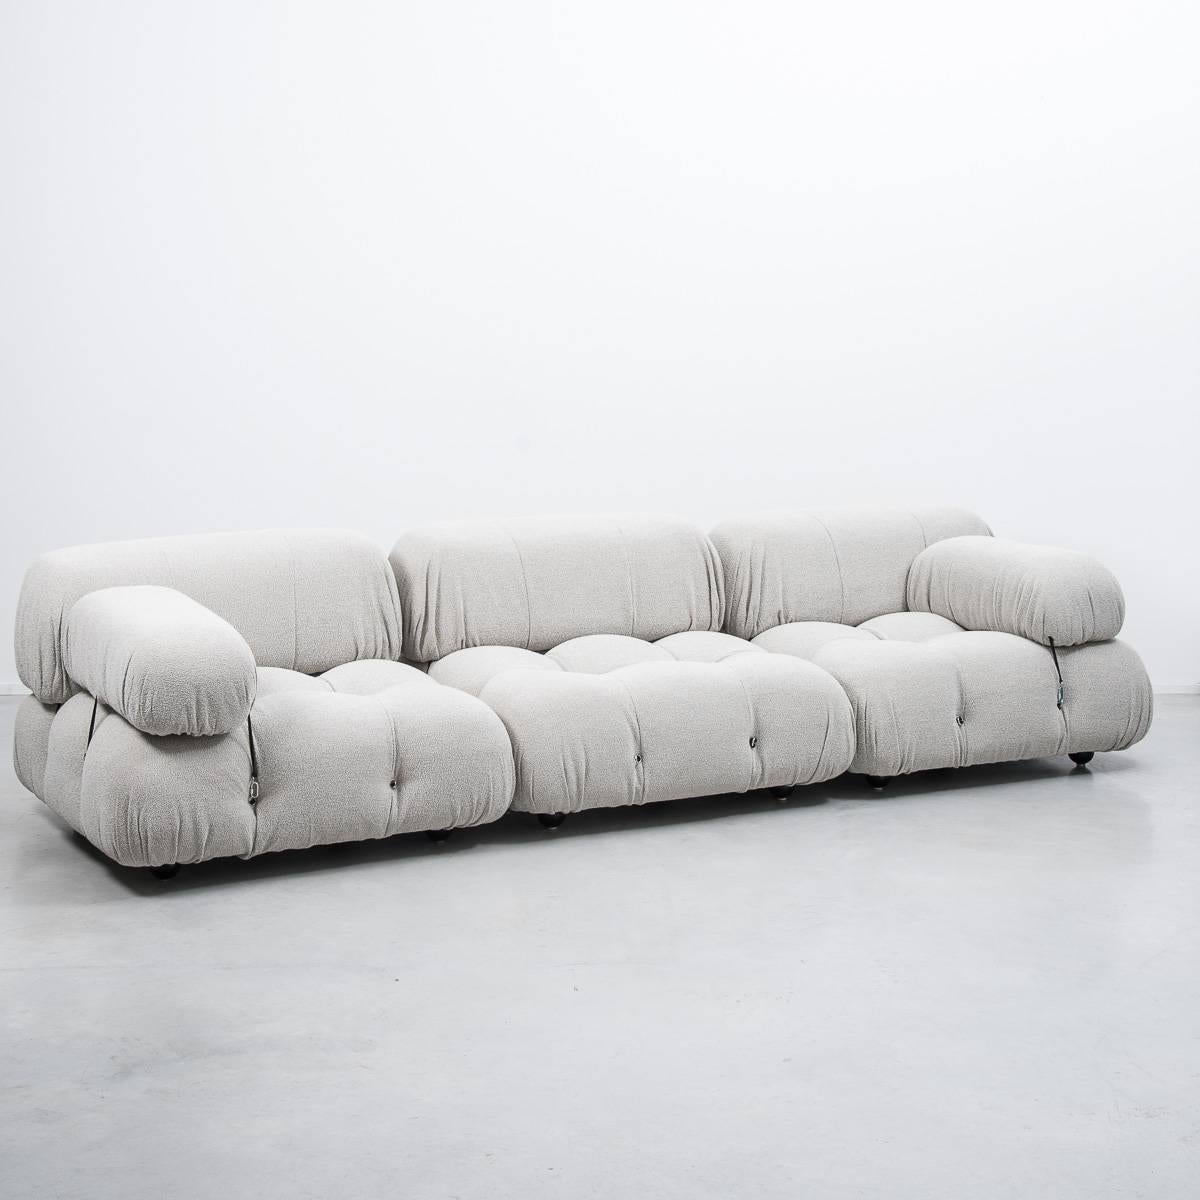 This three-seat modular sofa was designed by Mario Bellini in 1971 and was manufactured first by C&B and later by B&B Italia. The backs and armrests are provided with rings and carabiners, which allows the user to create the desired